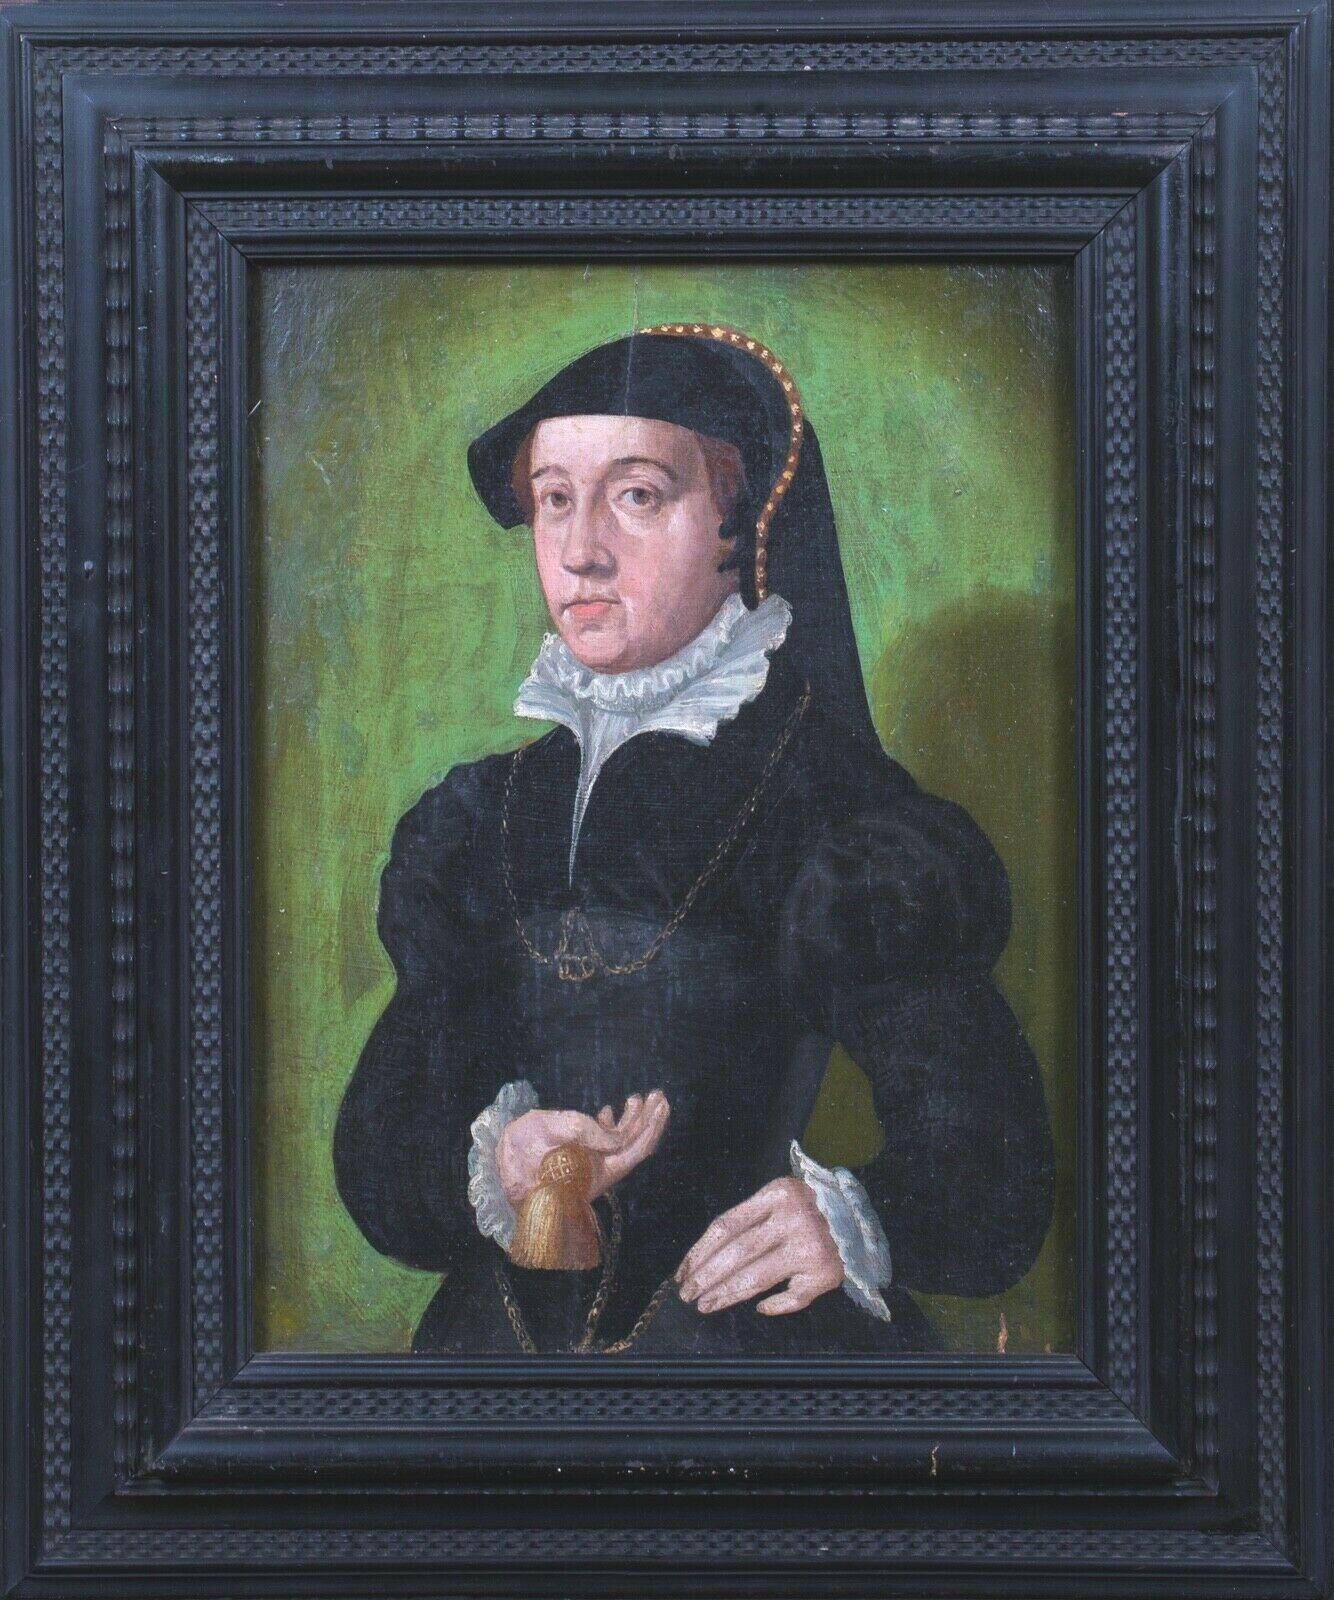 Portrait Of Jeanne III d'Albret (1528-1572), 16th Century - Painting by Unknown